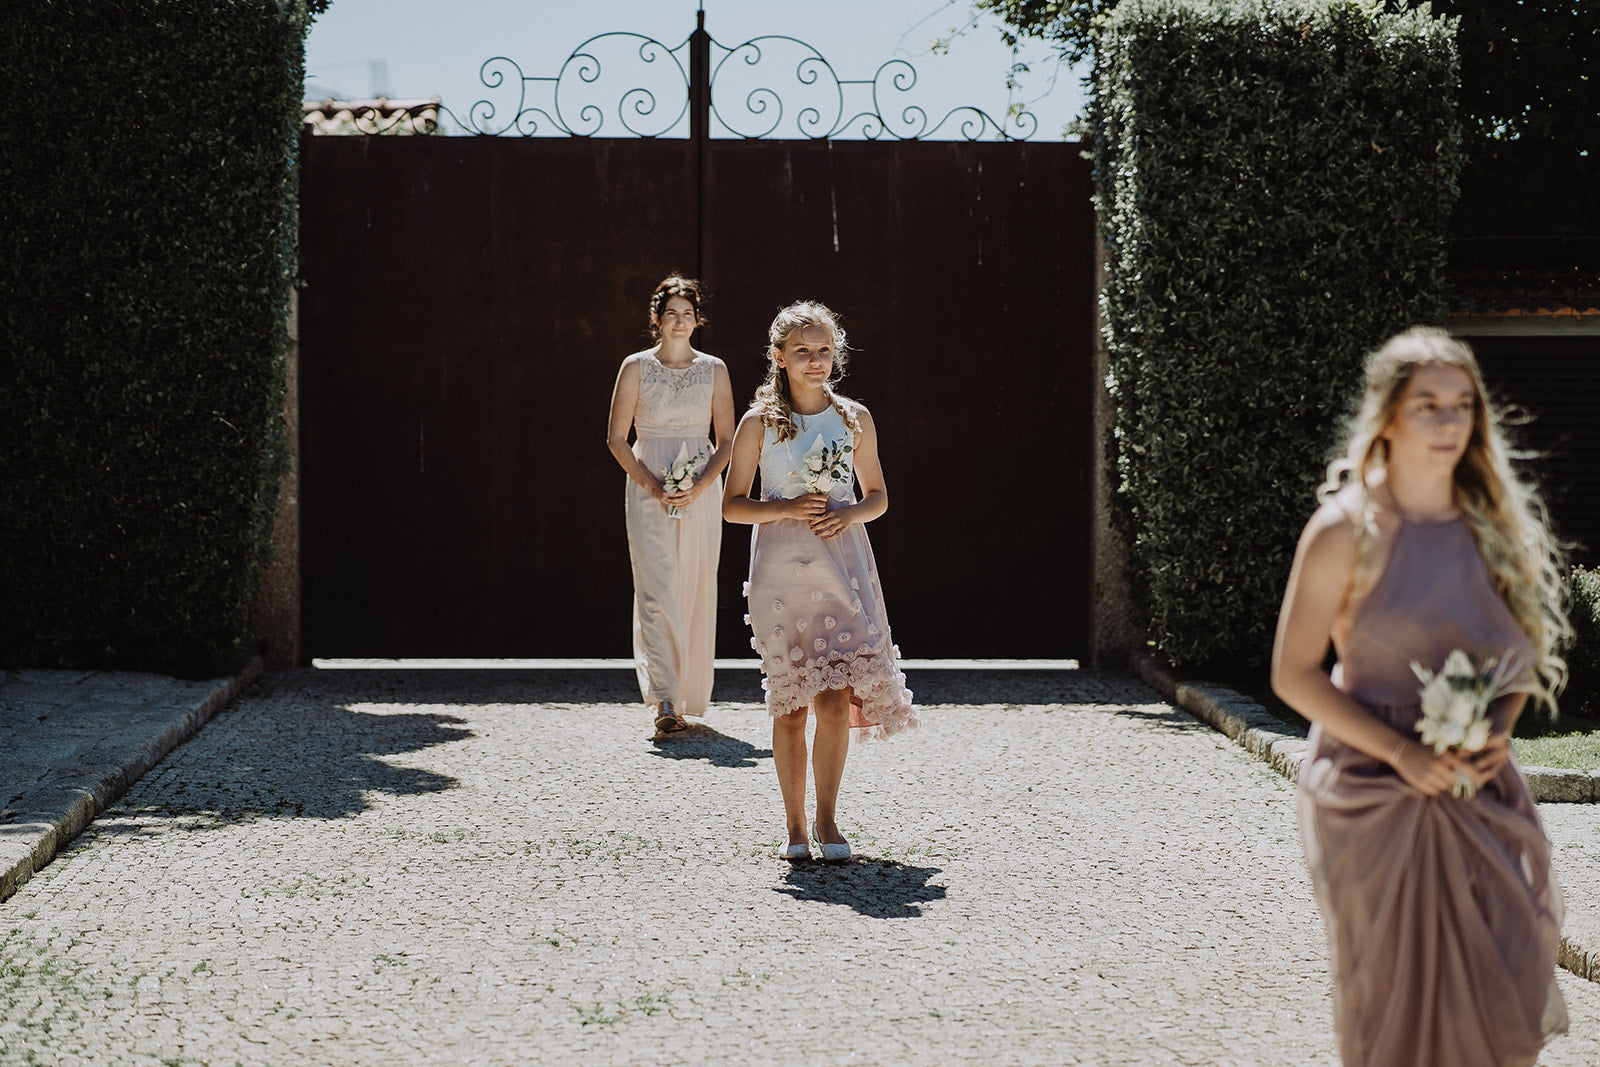 The Bridesmaids walking down the isle, in the garden setting, holding flowers.